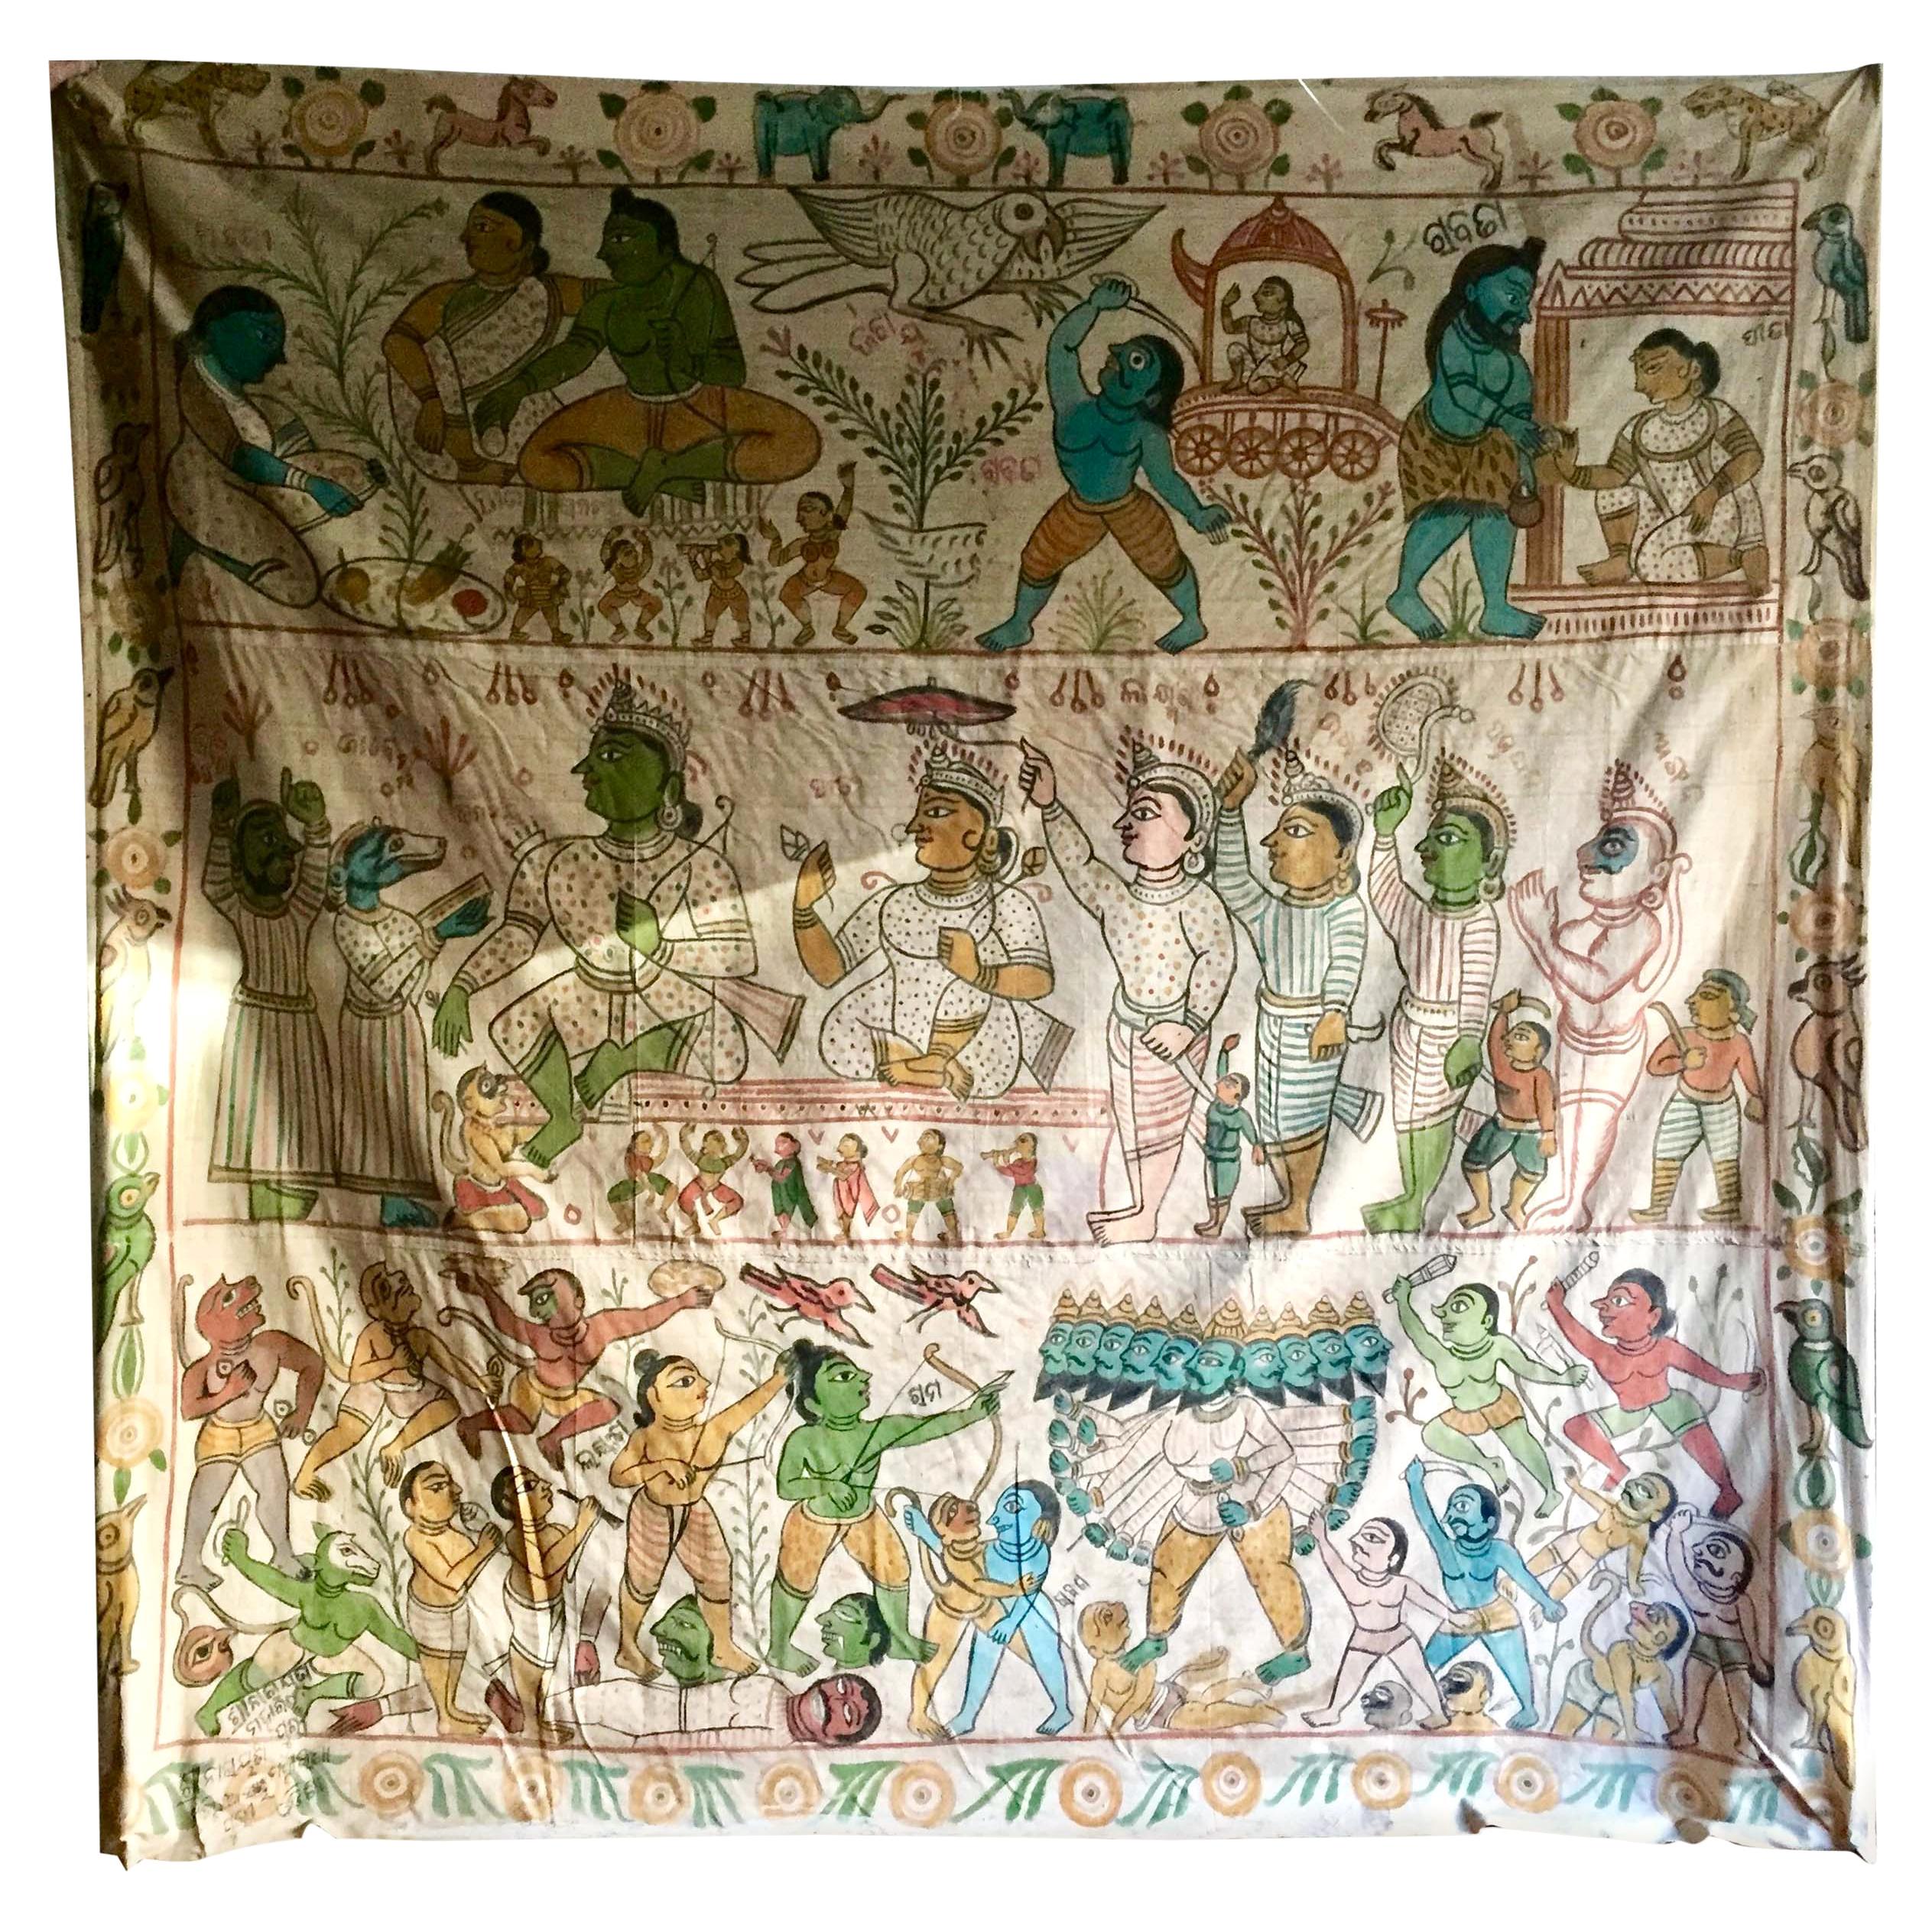 Over 9' Vintage Indian Wall Hanging Painting on Canvas from Diwali Festival For Sale